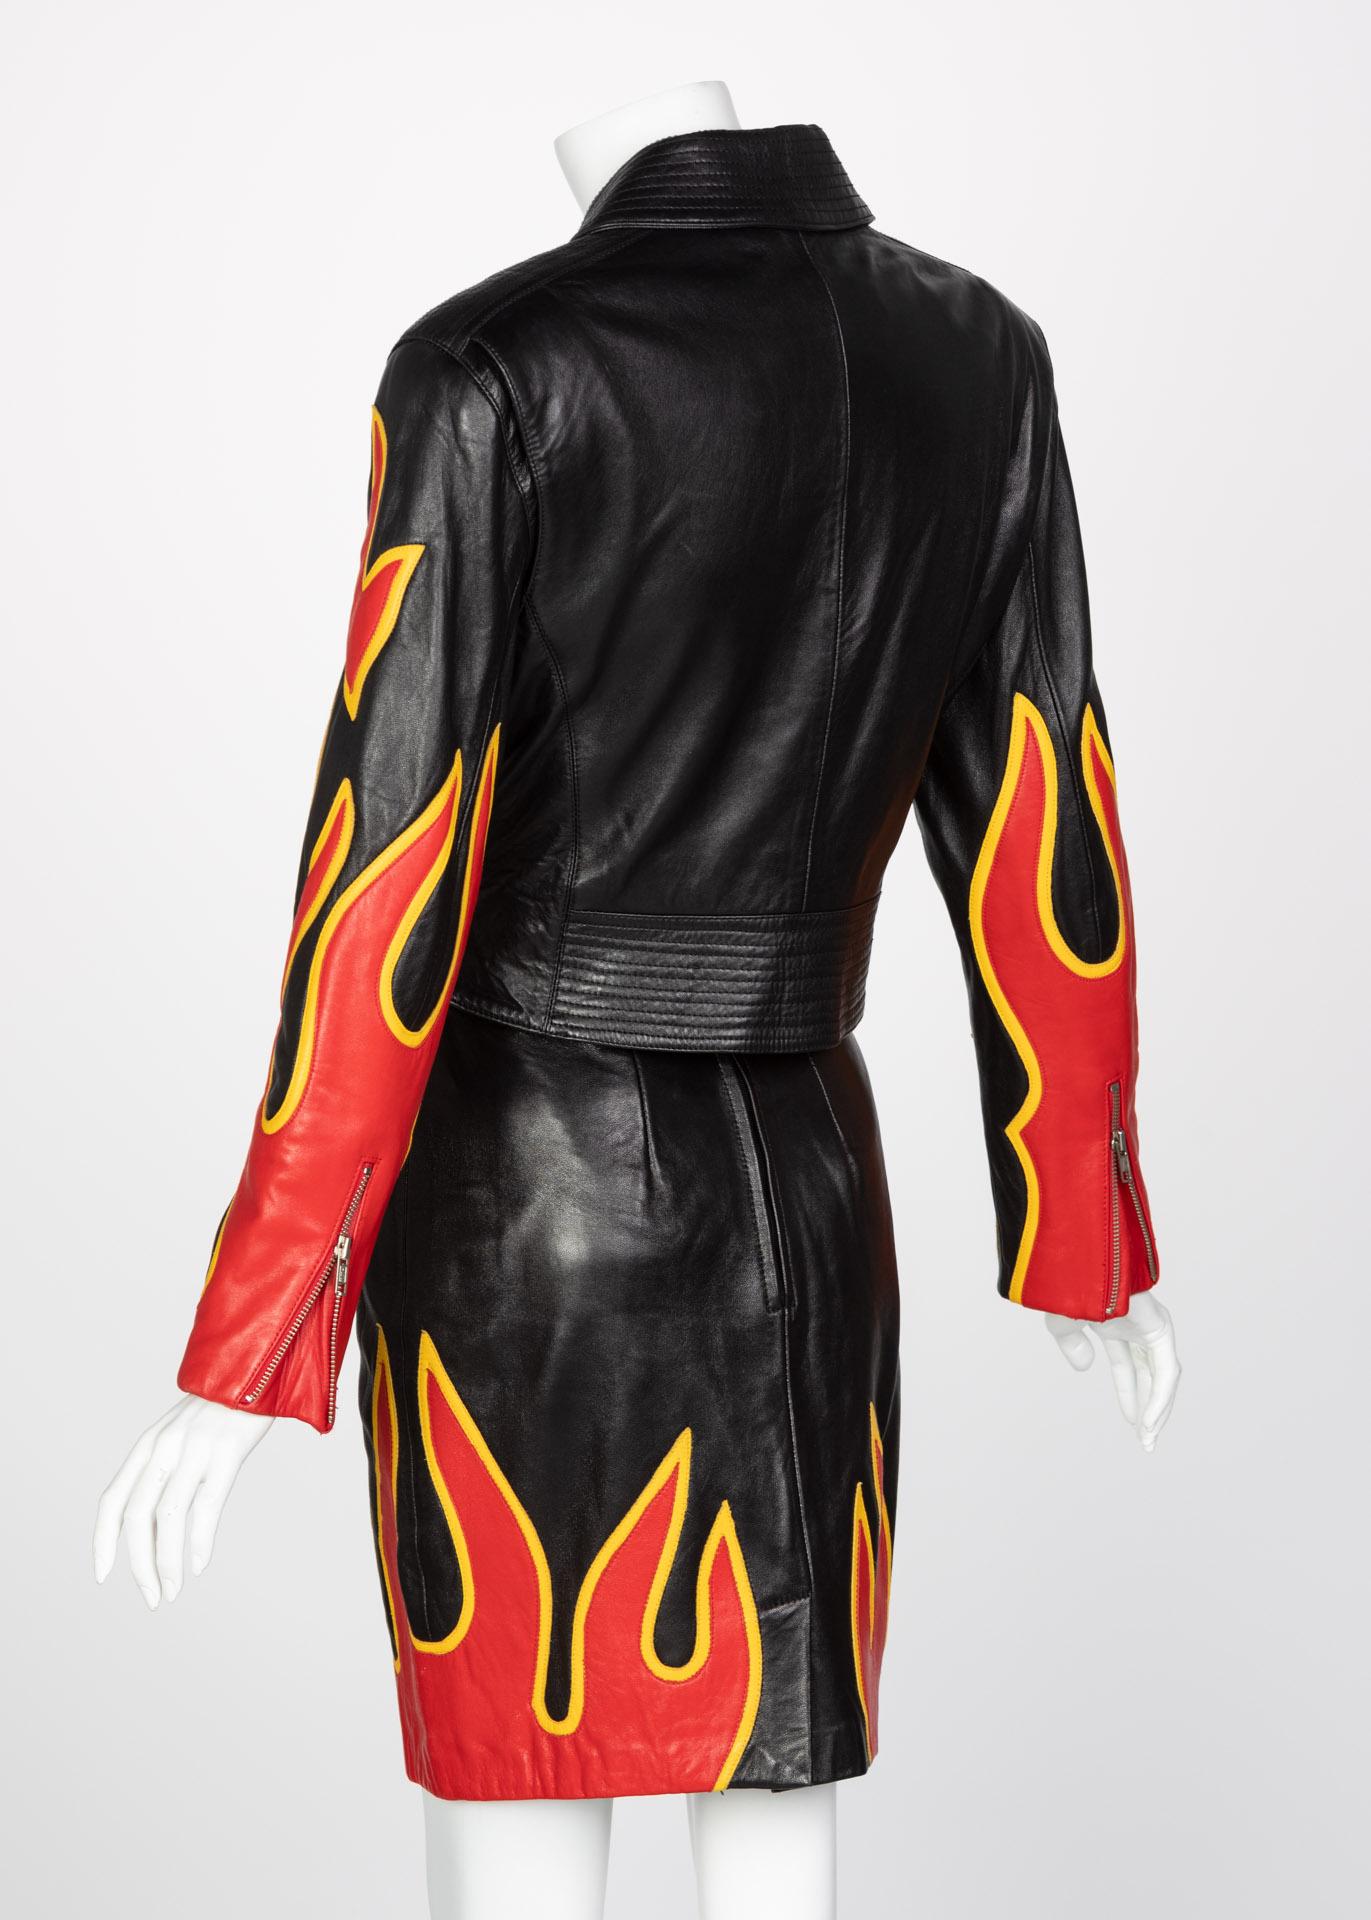 Michael Hoban North Beach Leather Black Red Flames Jacket Skirt Set, 1990s In Excellent Condition For Sale In Boca Raton, FL